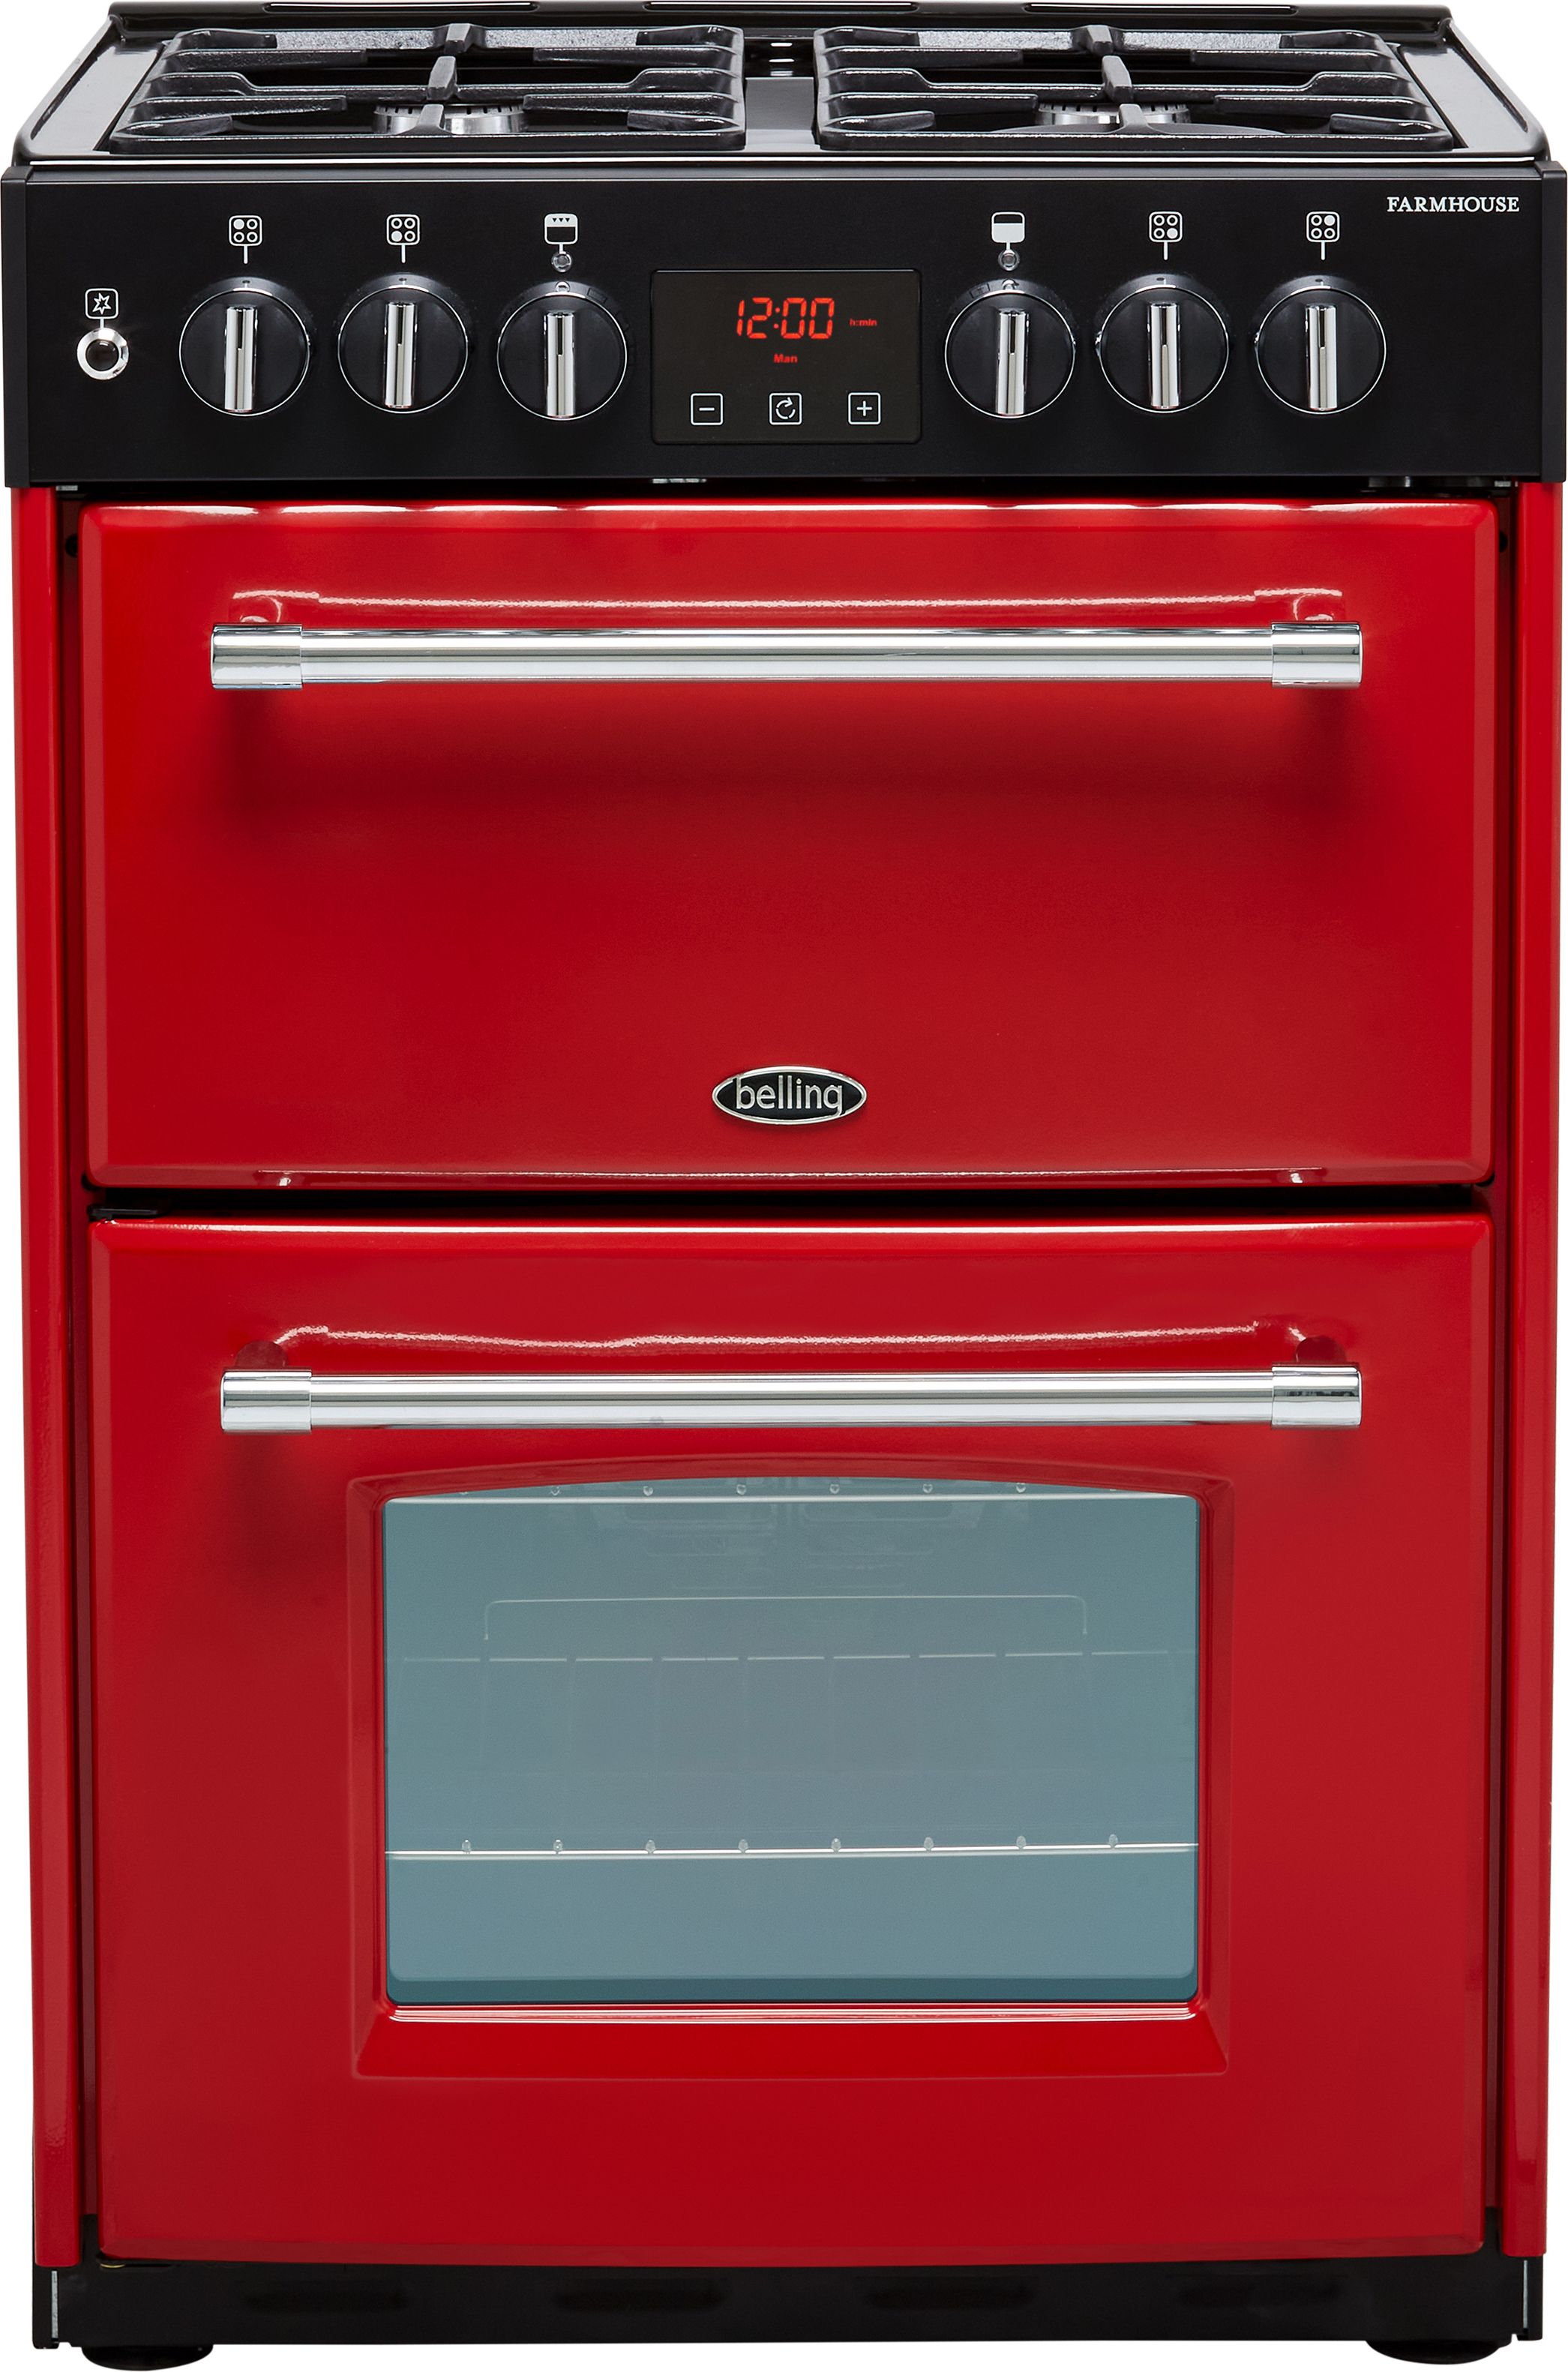 Belling Farmhouse60DF 60cm Freestanding Dual Fuel Cooker - Hot Jalapeno - AA Rated Red